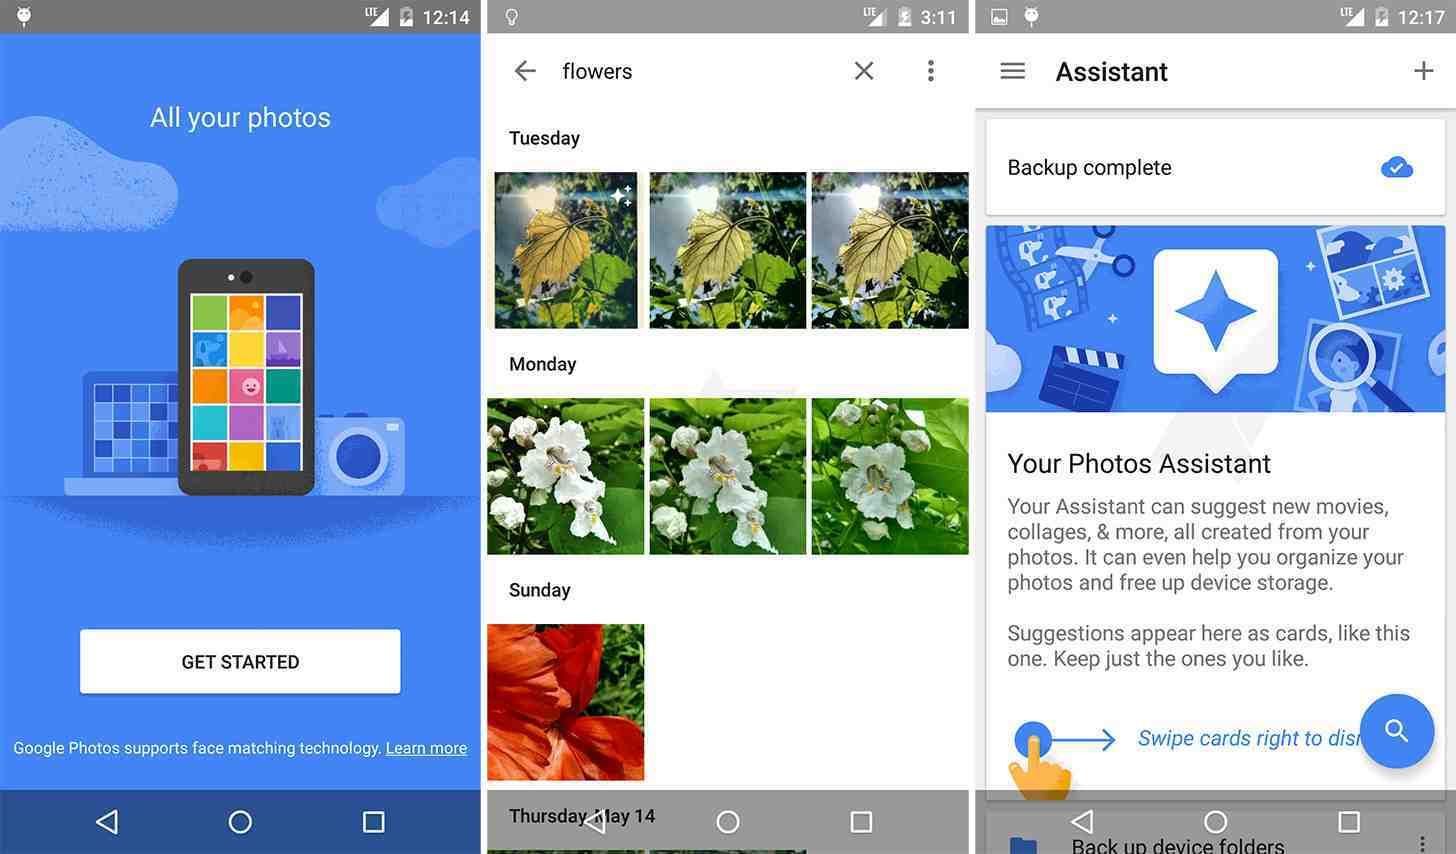 Google Photos app helps you quickly eliminate duplicate photos for backing up